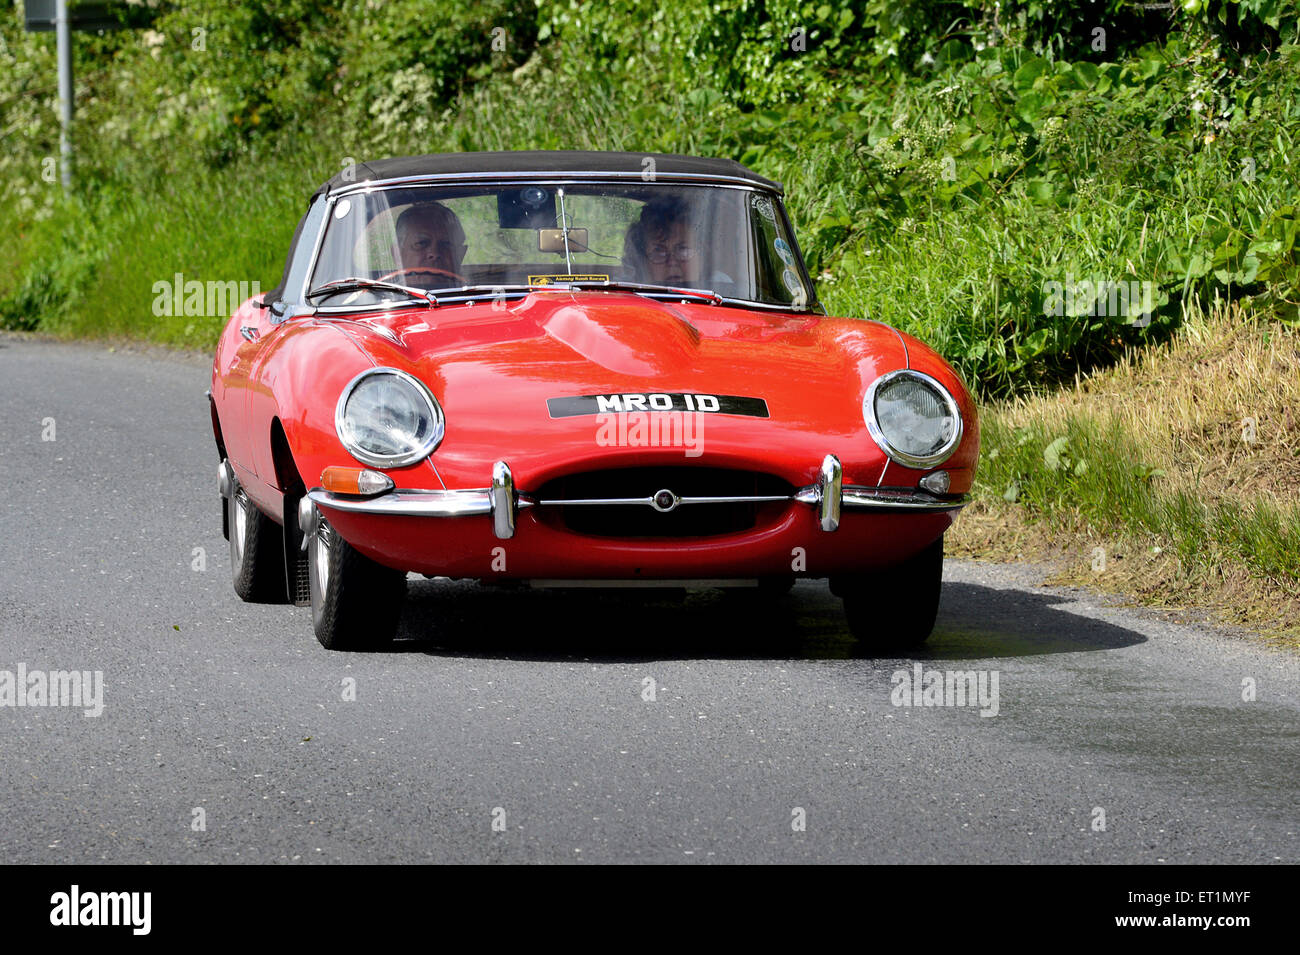 1960s Jaguar E-Type classic red sports car on country road, Burnfoot, County Donegal, Ireland Stock Photo